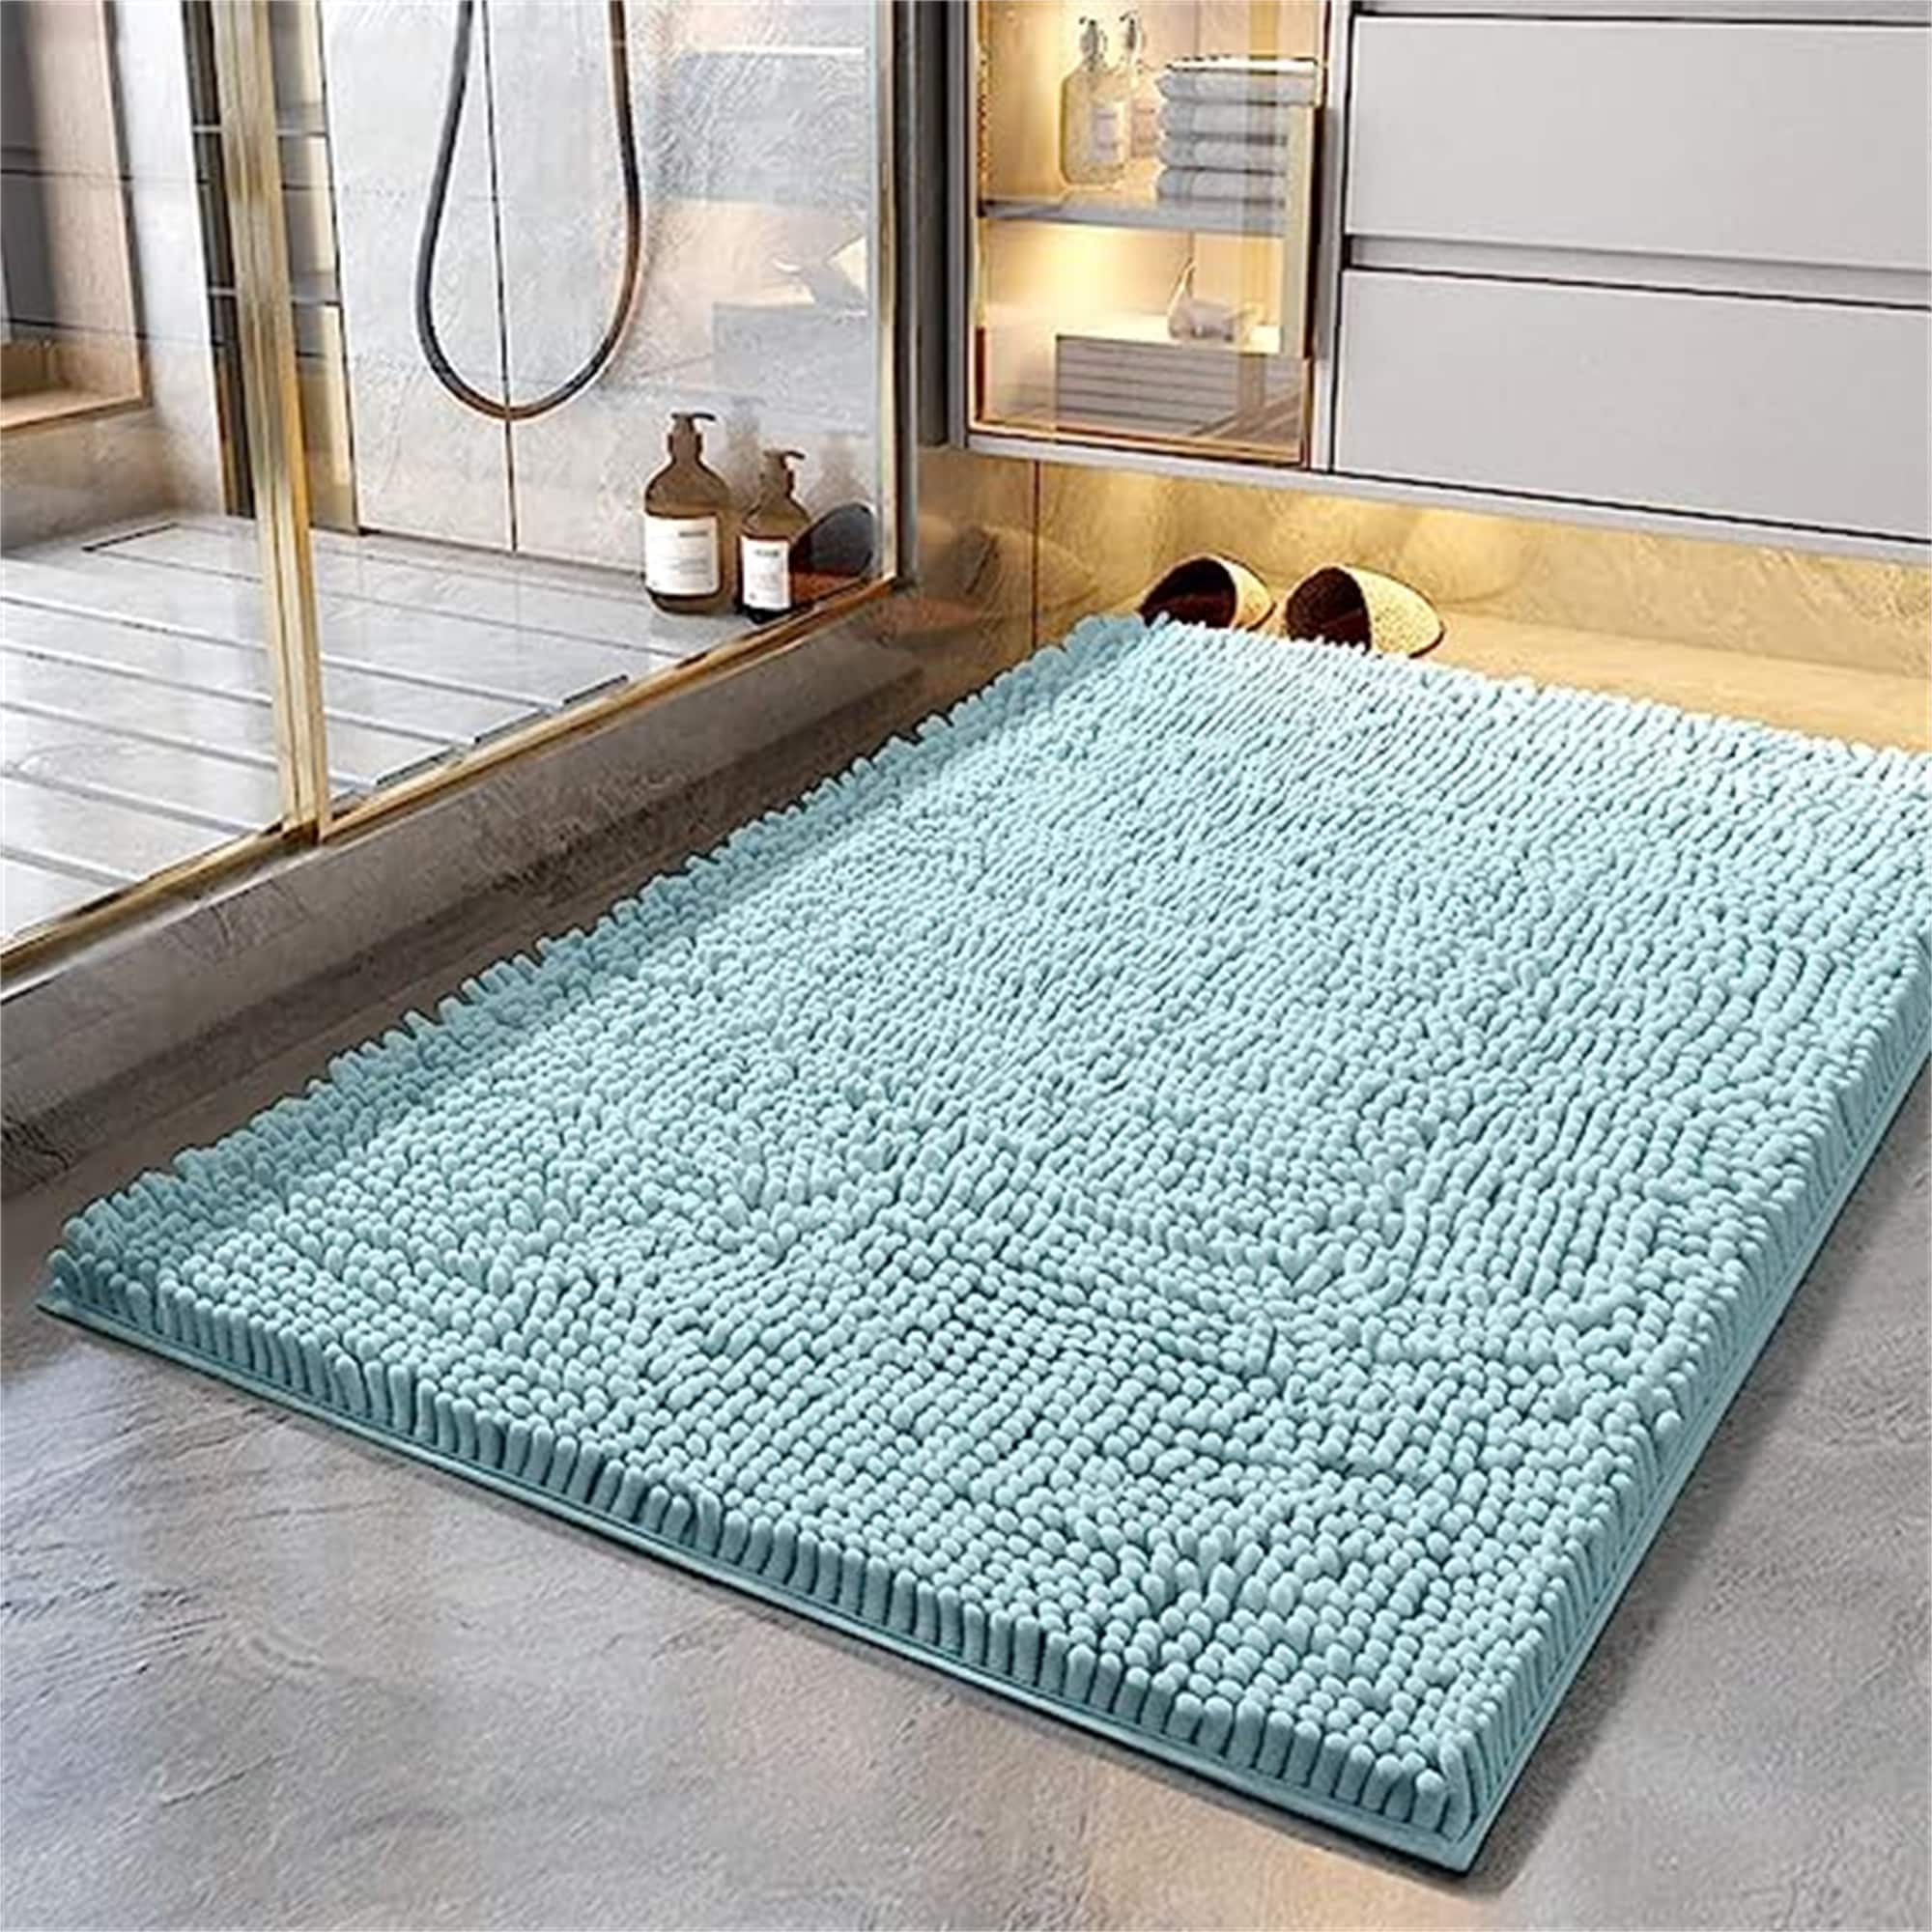 https://ak1.ostkcdn.com/images/products/is/images/direct/1e9a501b727ae1a1dbfc46f9bc8801061c92bc68/Bathroom-Rug.jpg